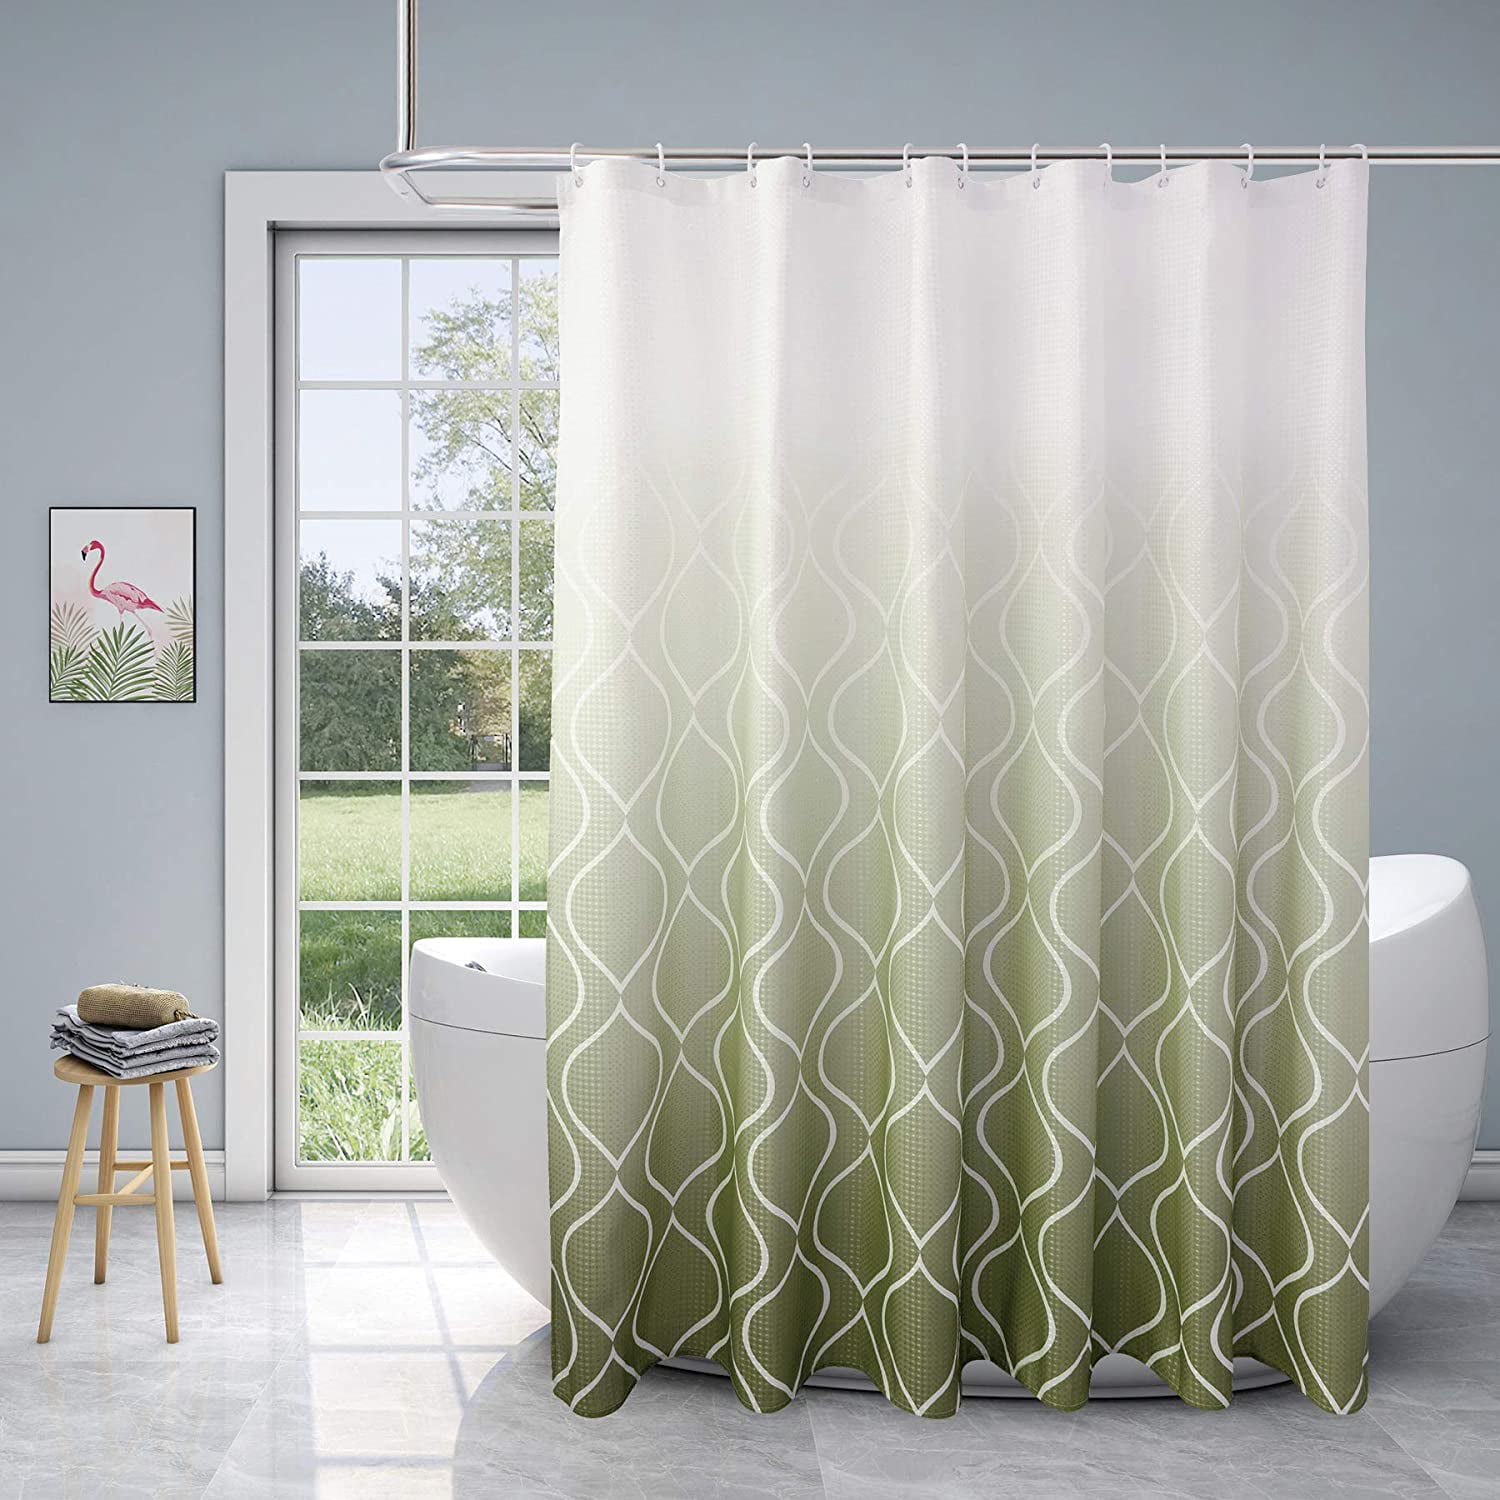 Details about   Nature Grassland Bathroom Shower Curtains Polyester Waterproof Frbric 71'' 